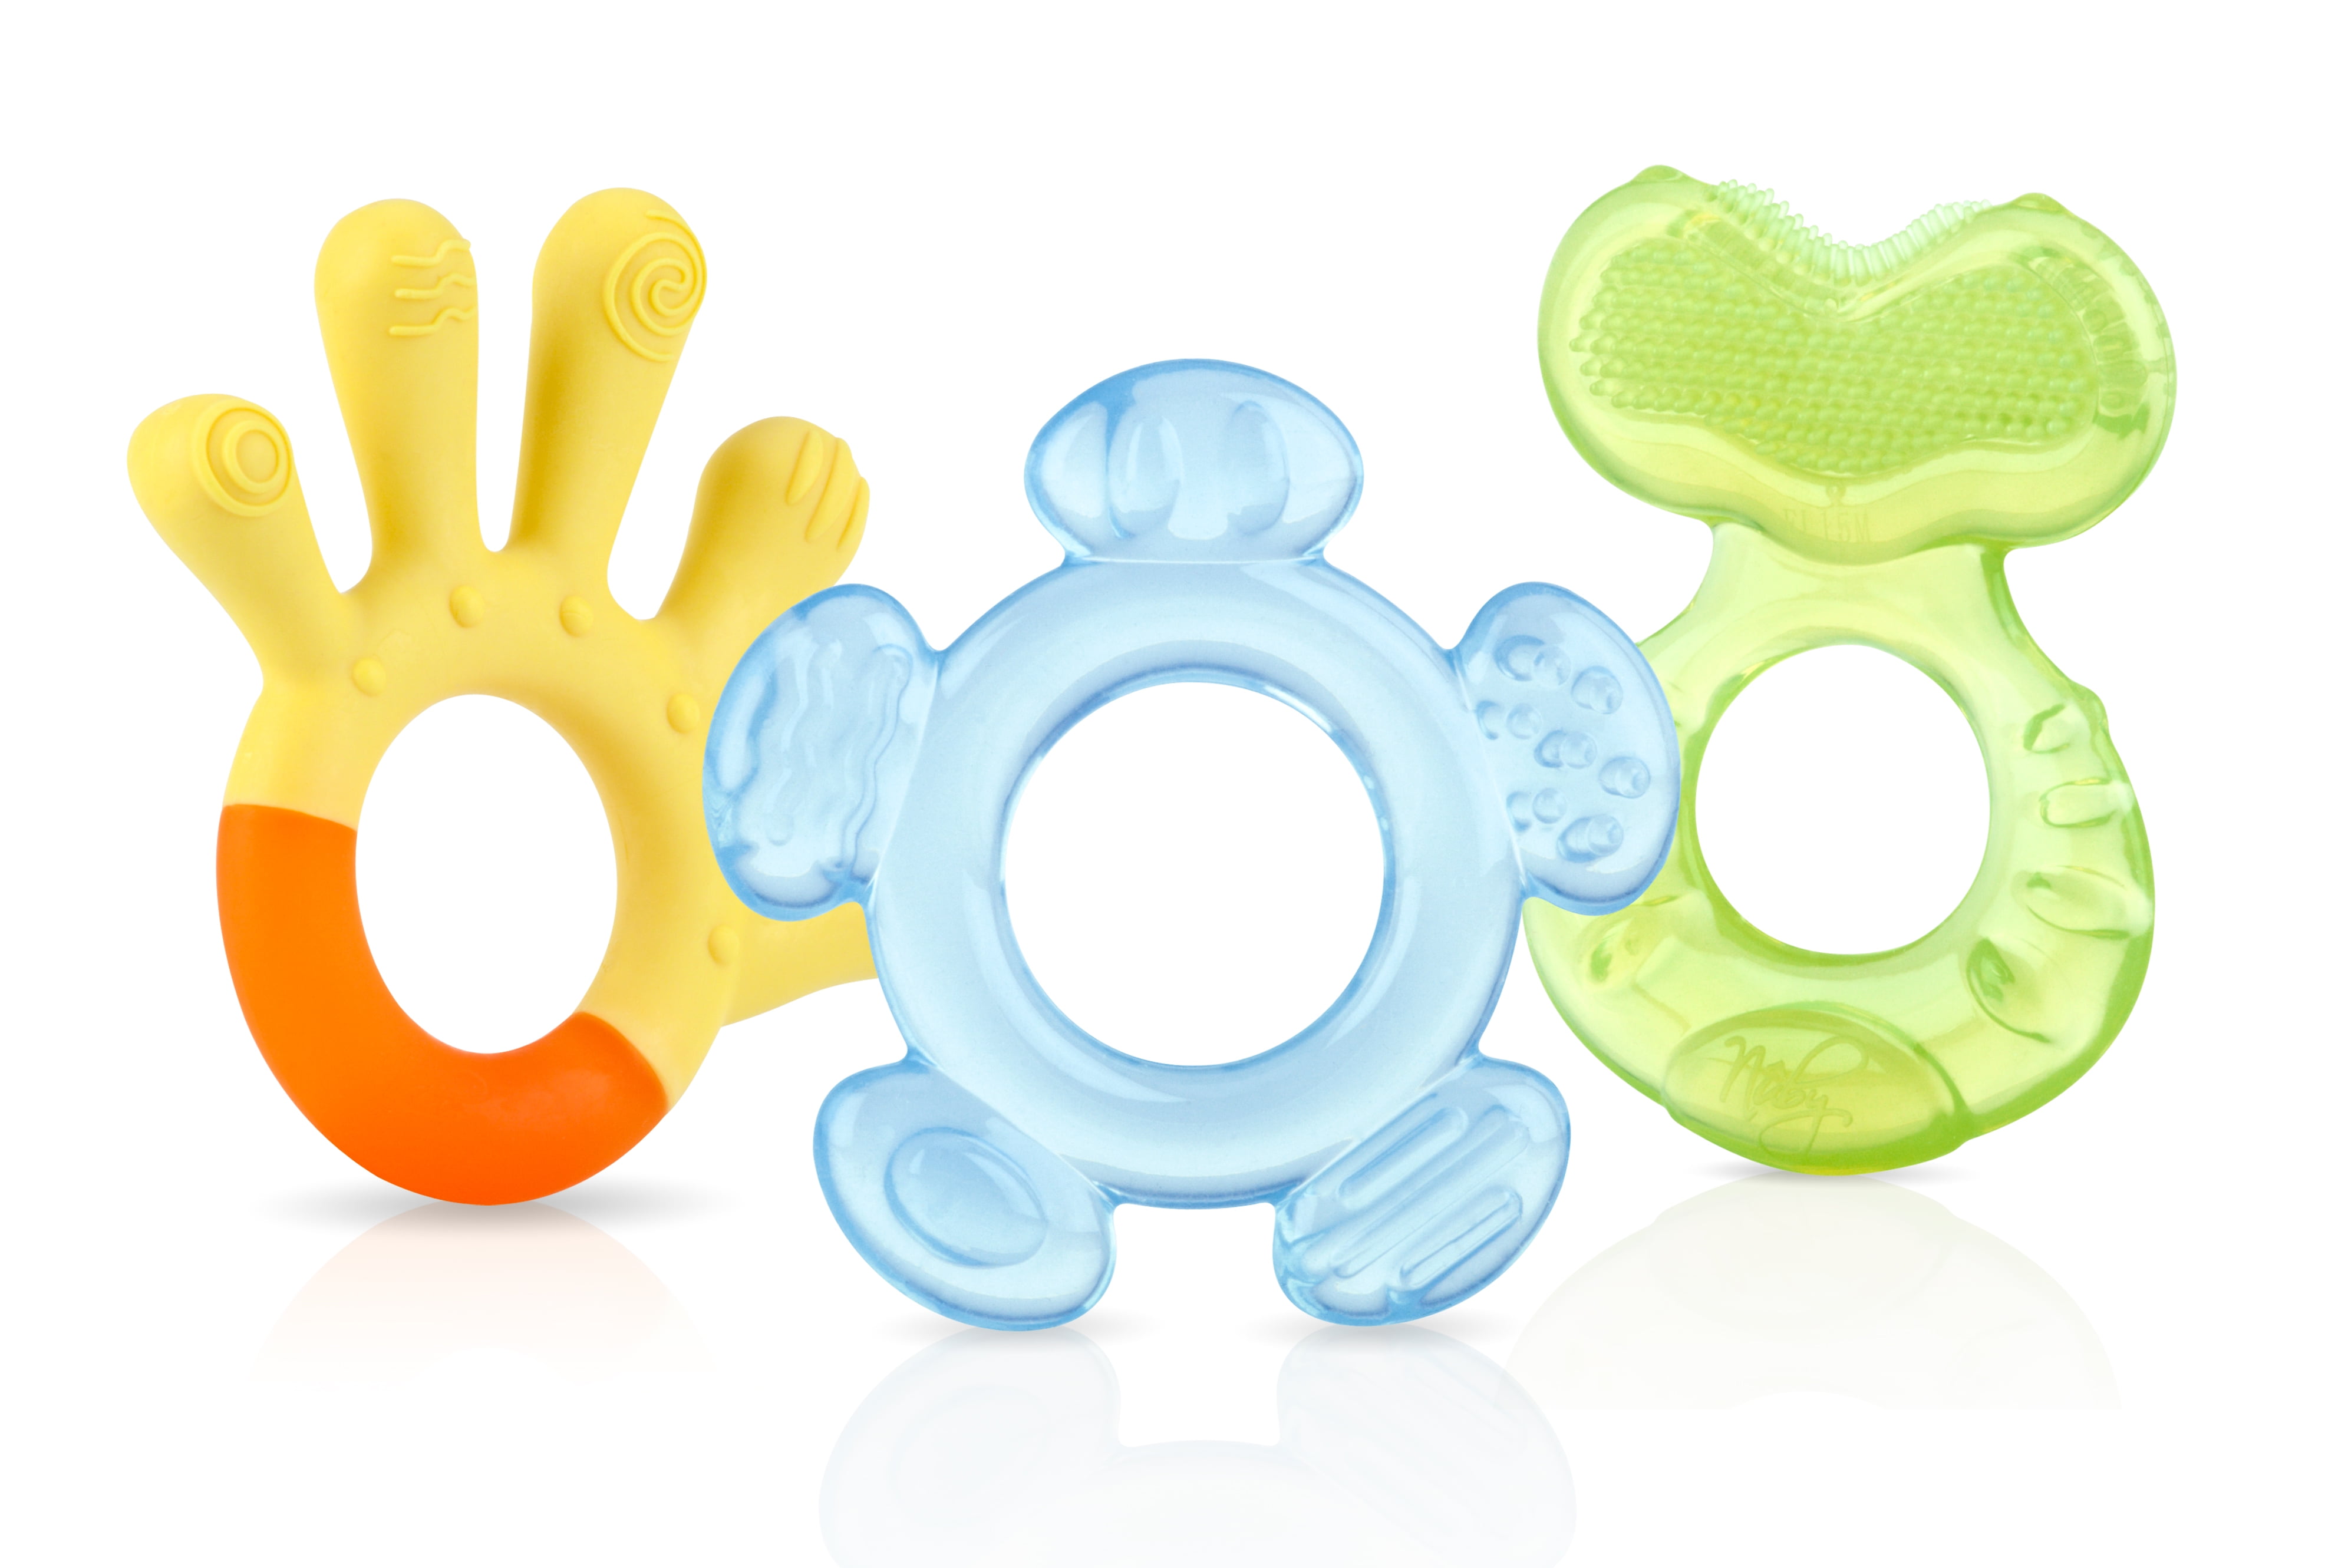 Nuby 3-Step Soothing Teether Set for Babies, 3 Count